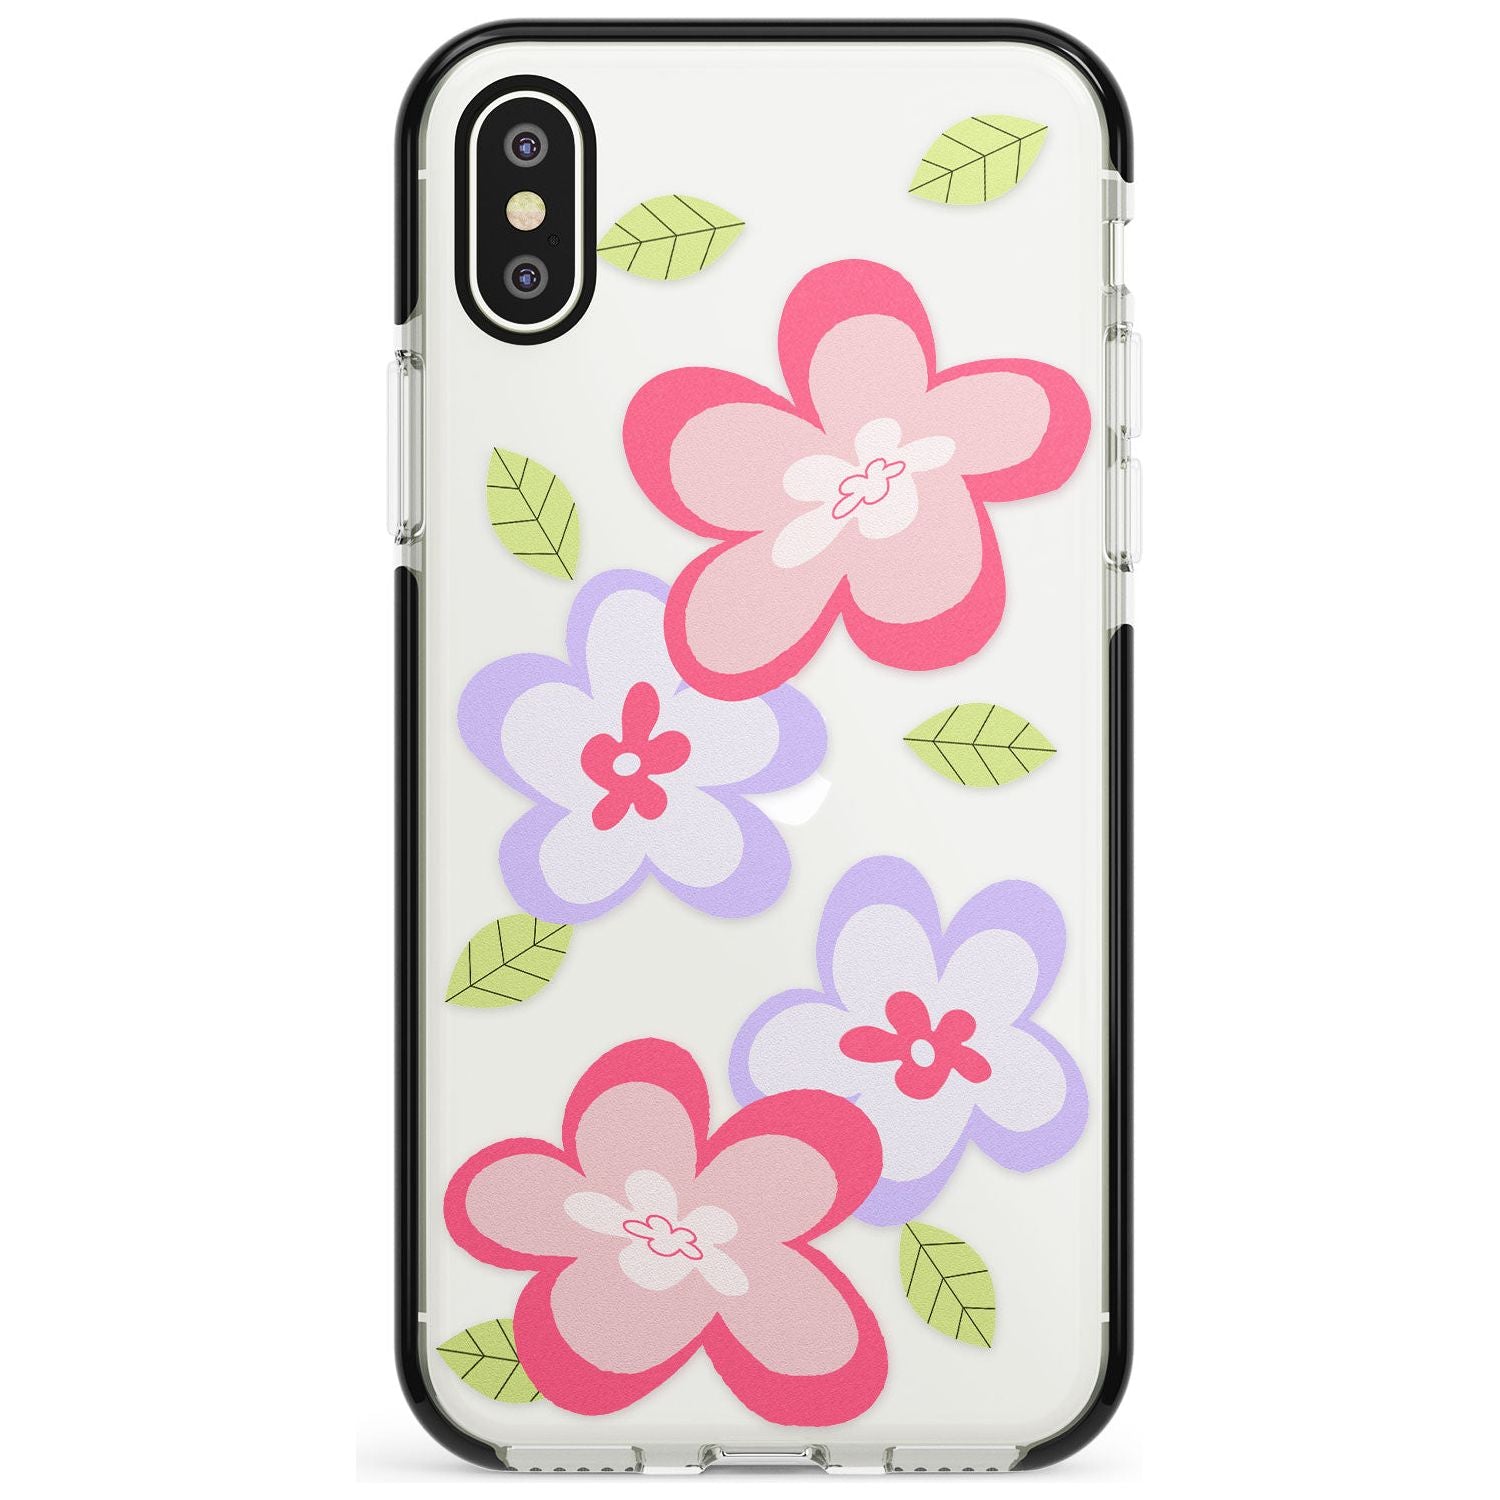 Summer Heat Phone Case for iPhone X XS Max XR